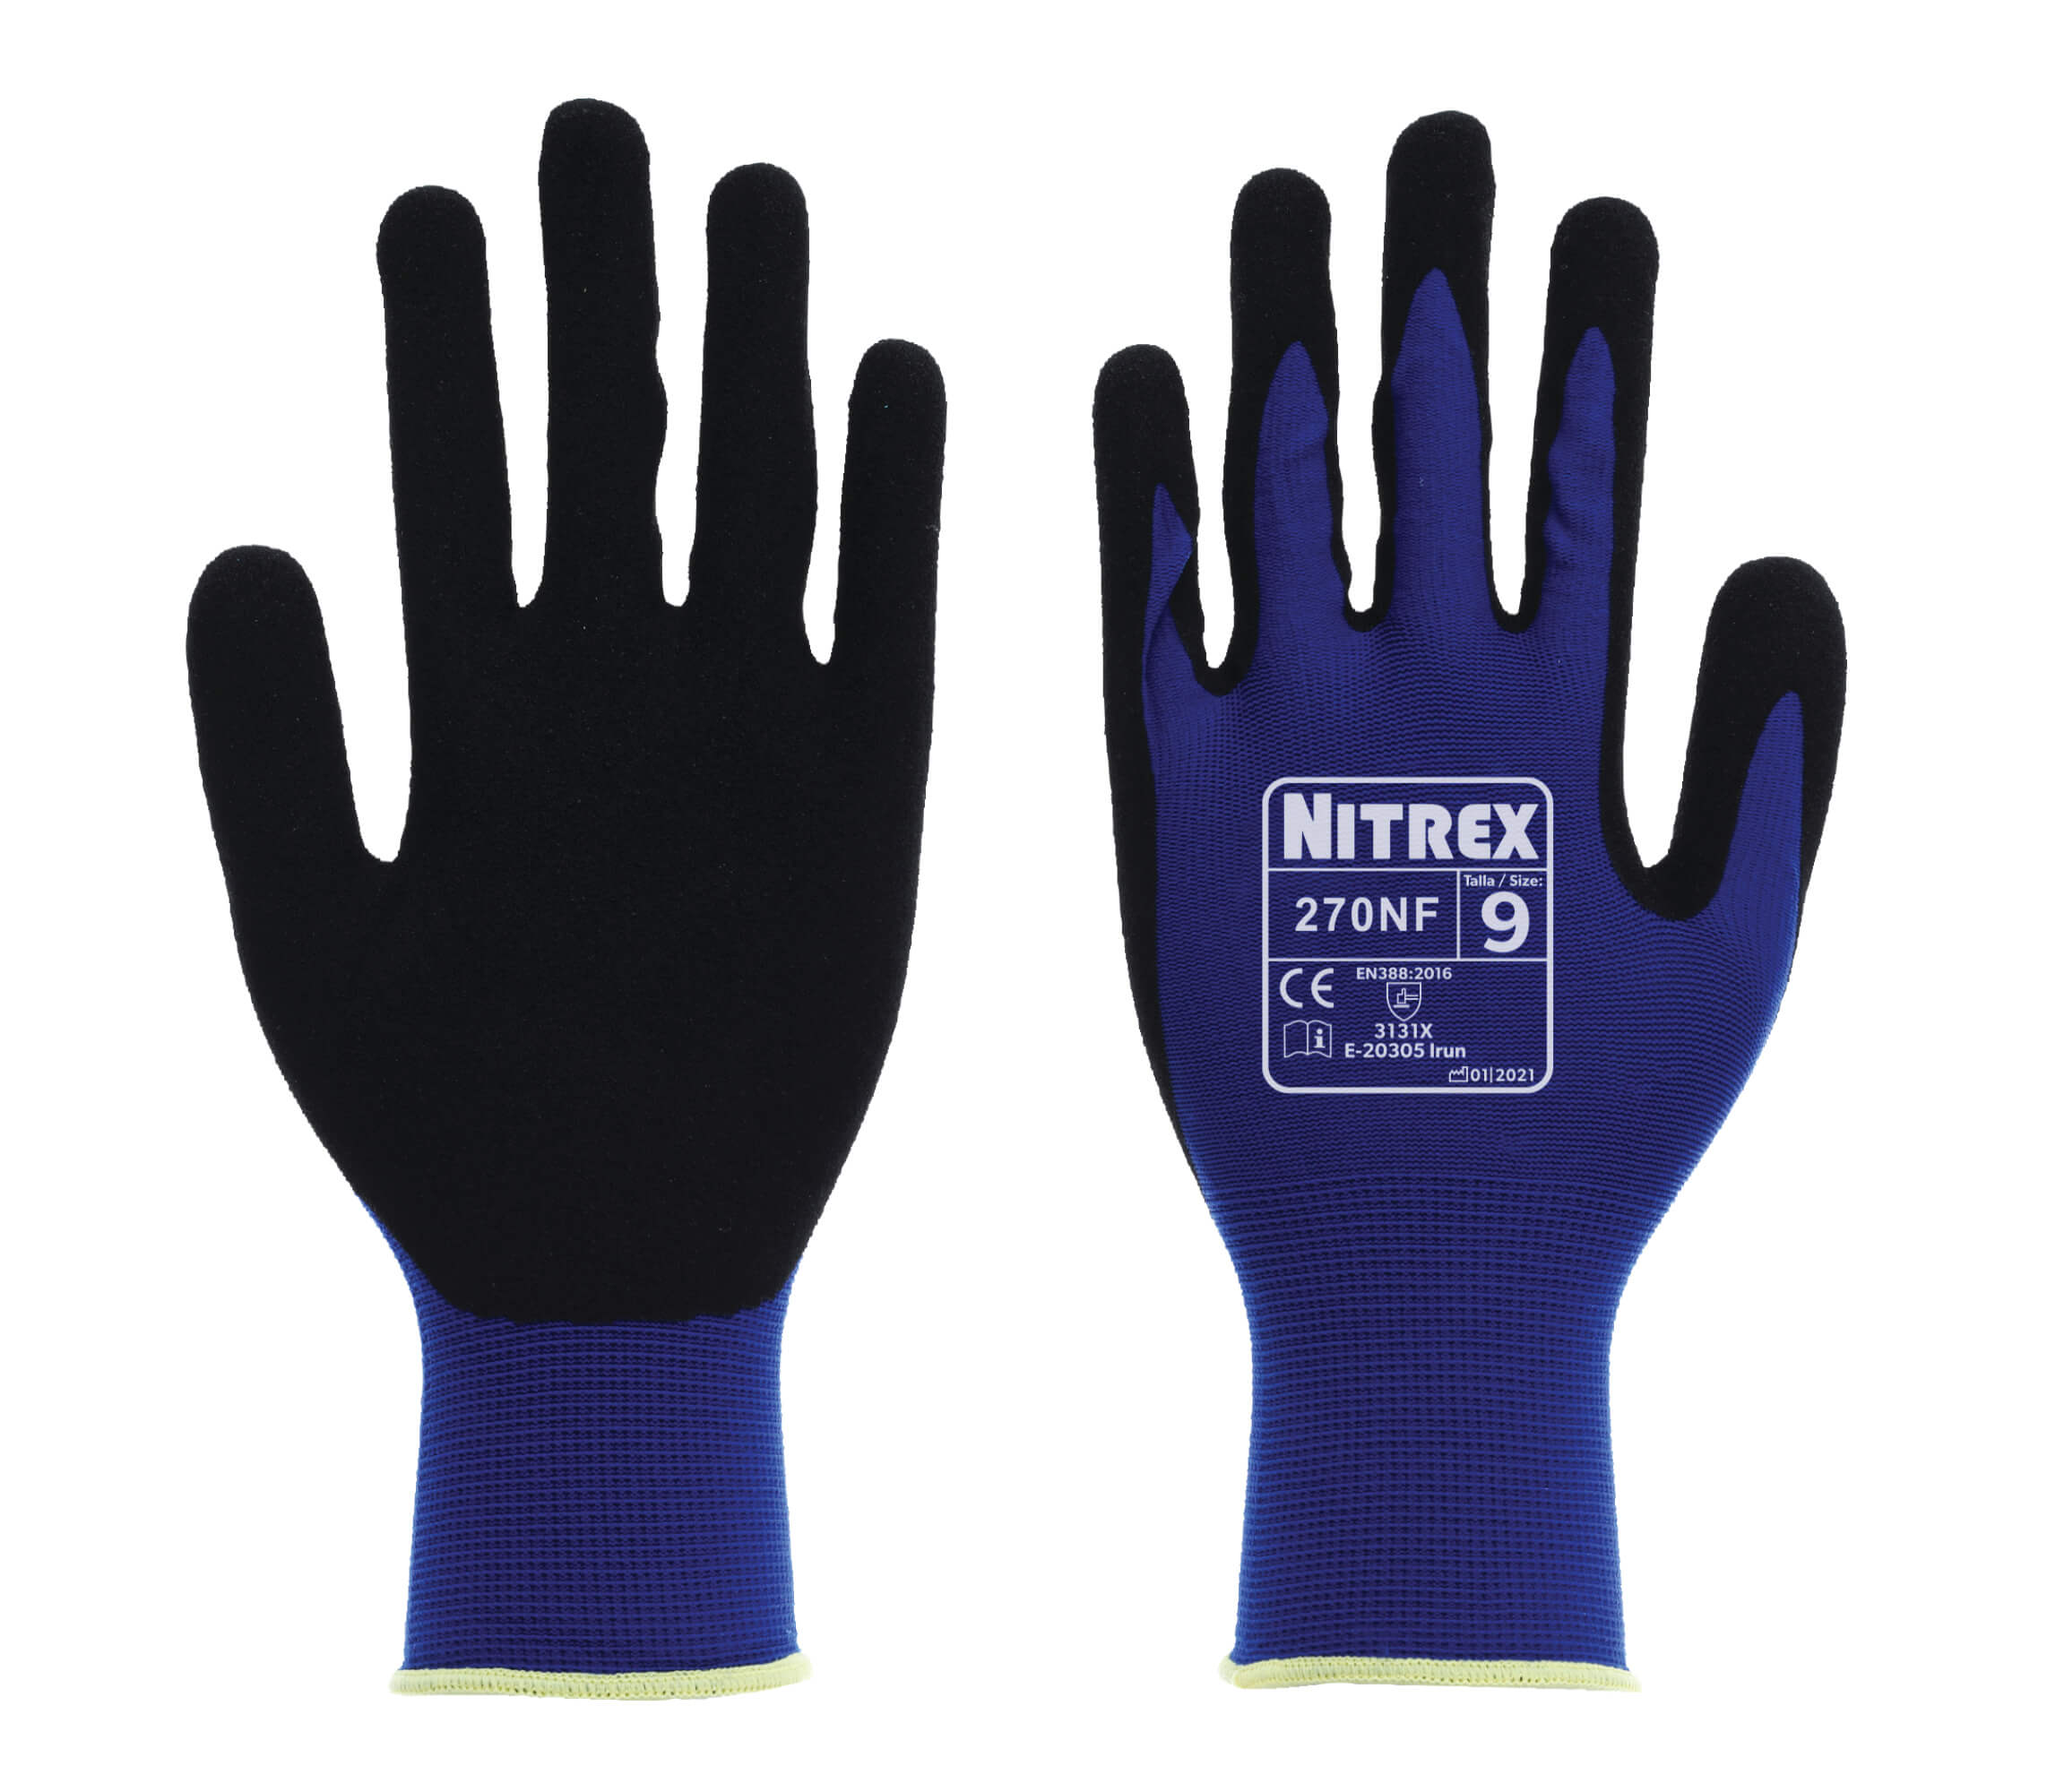 Nitrex 270NF - Grey Black Gloves with Grip Dots - Foam Nitrile Palm Coated - Size 6/XS